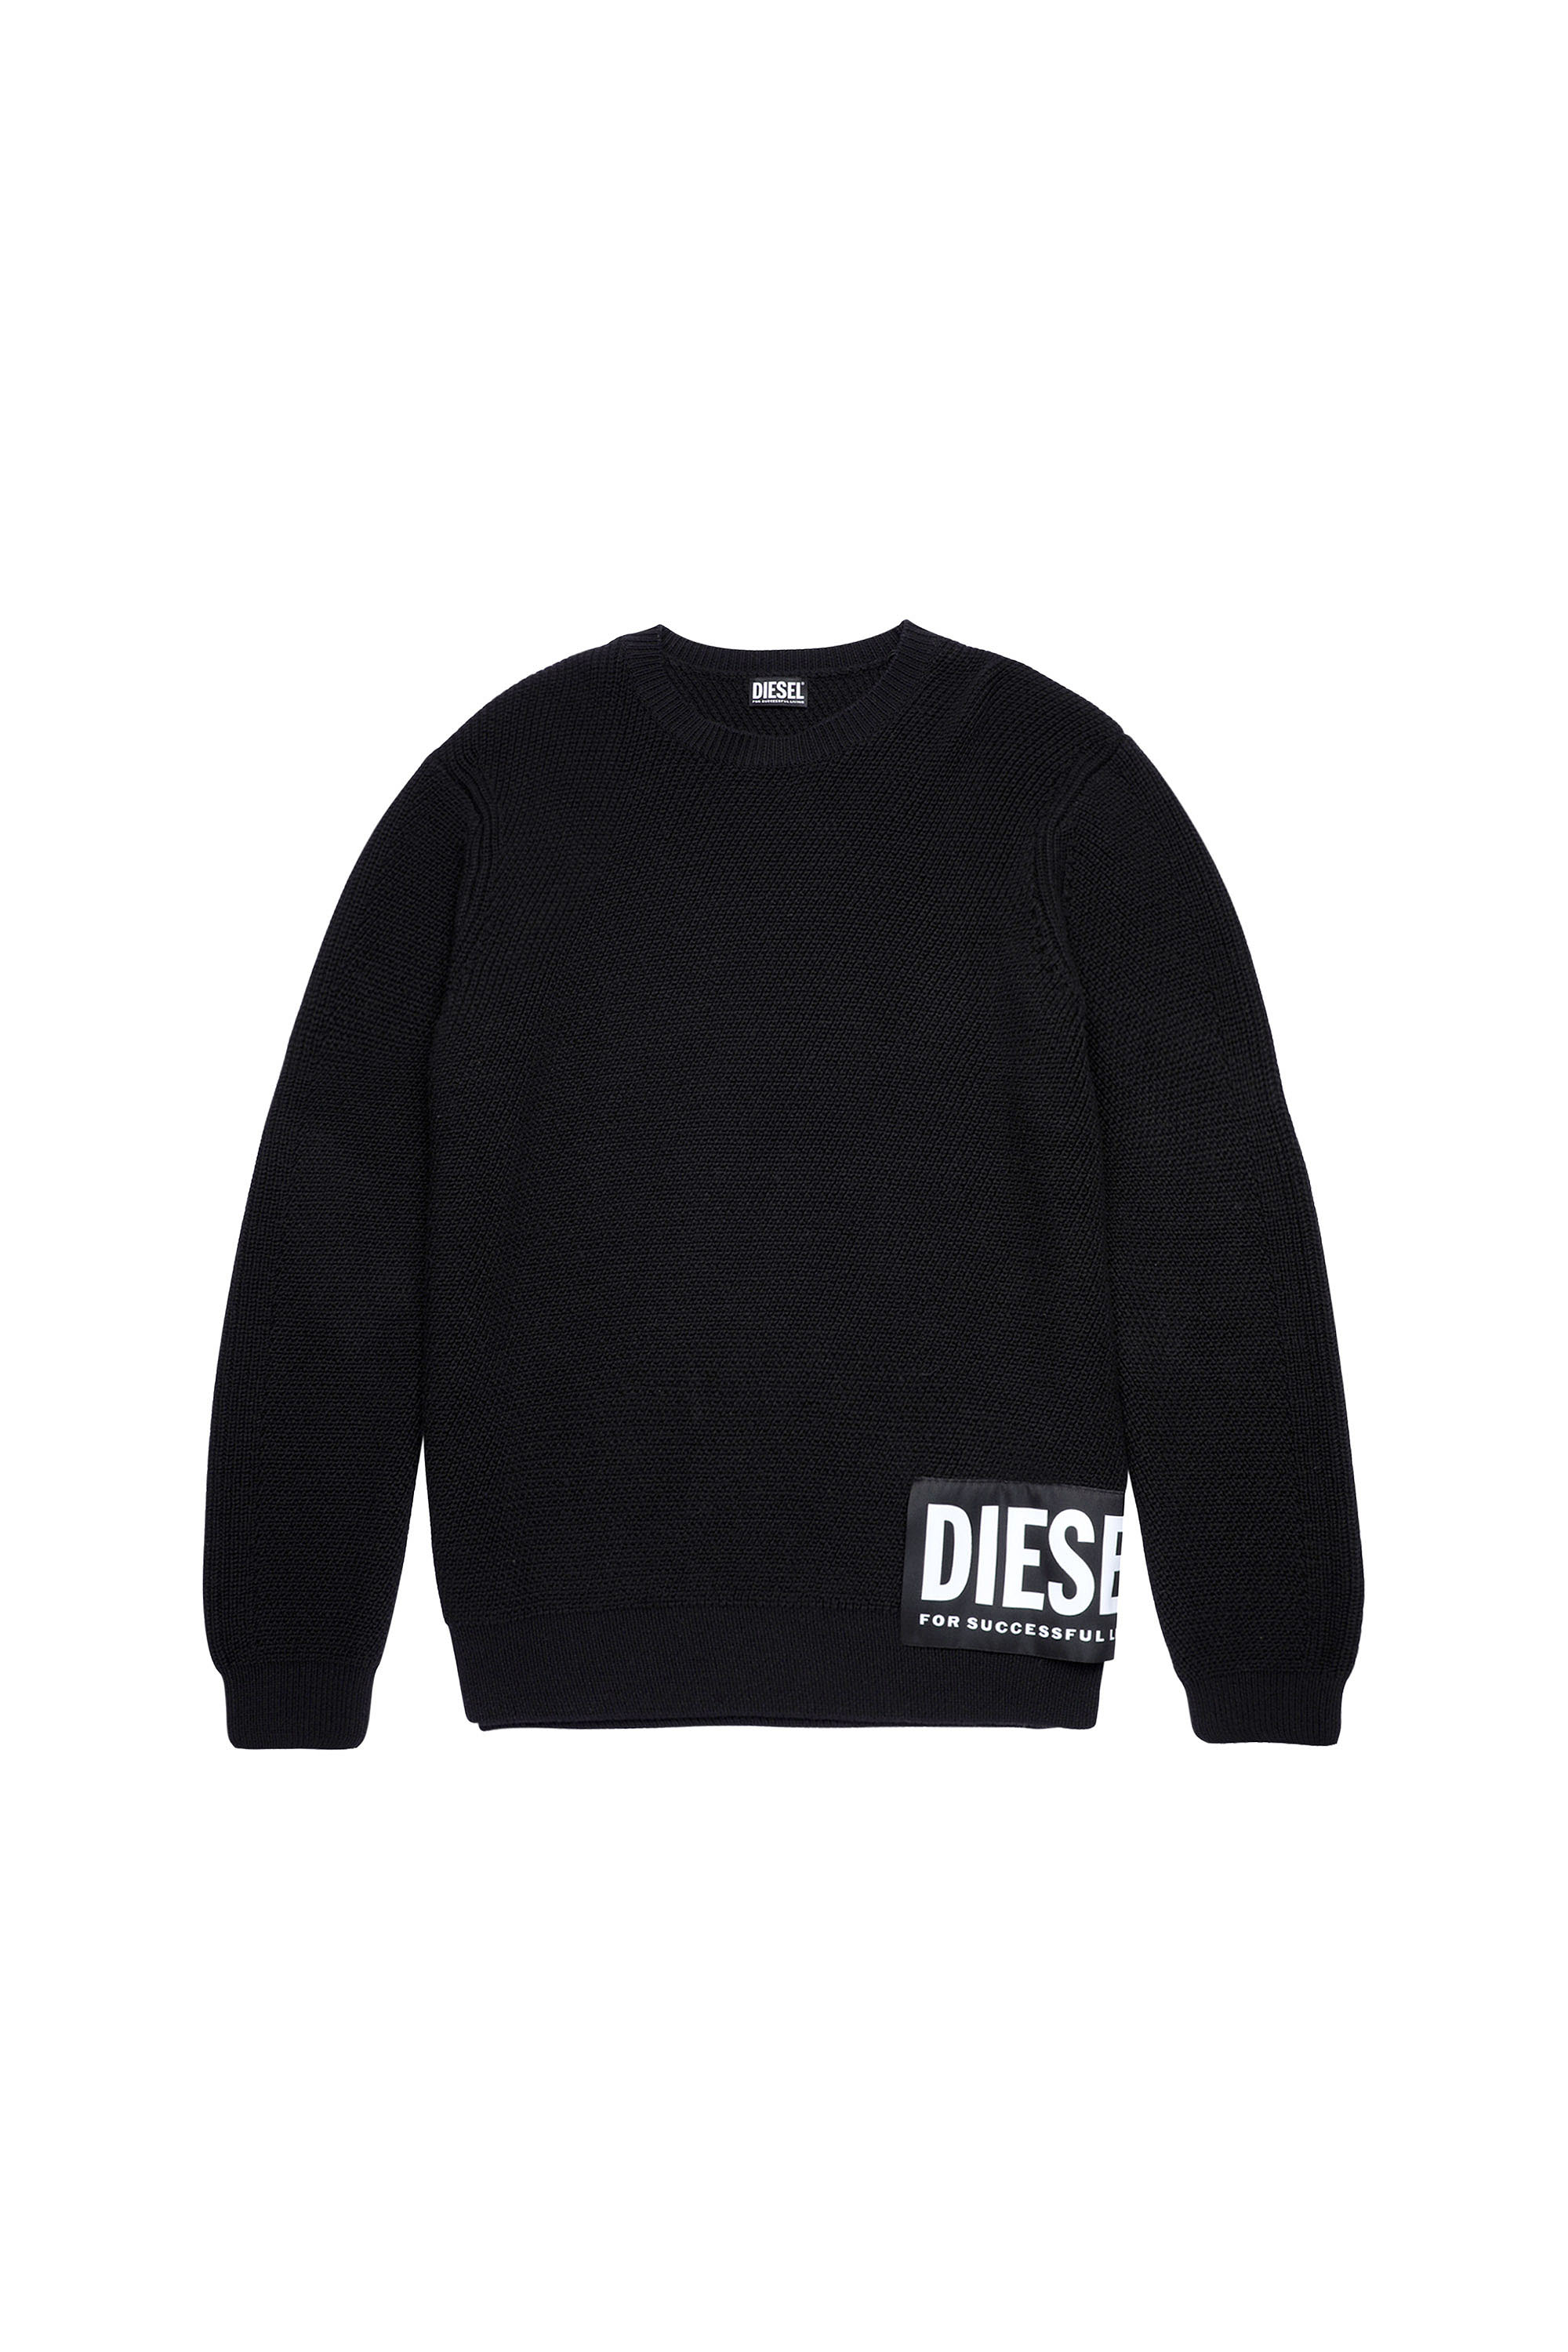 K-HONOLULU Man: Ribbed pullover with mega logo patch | Diesel